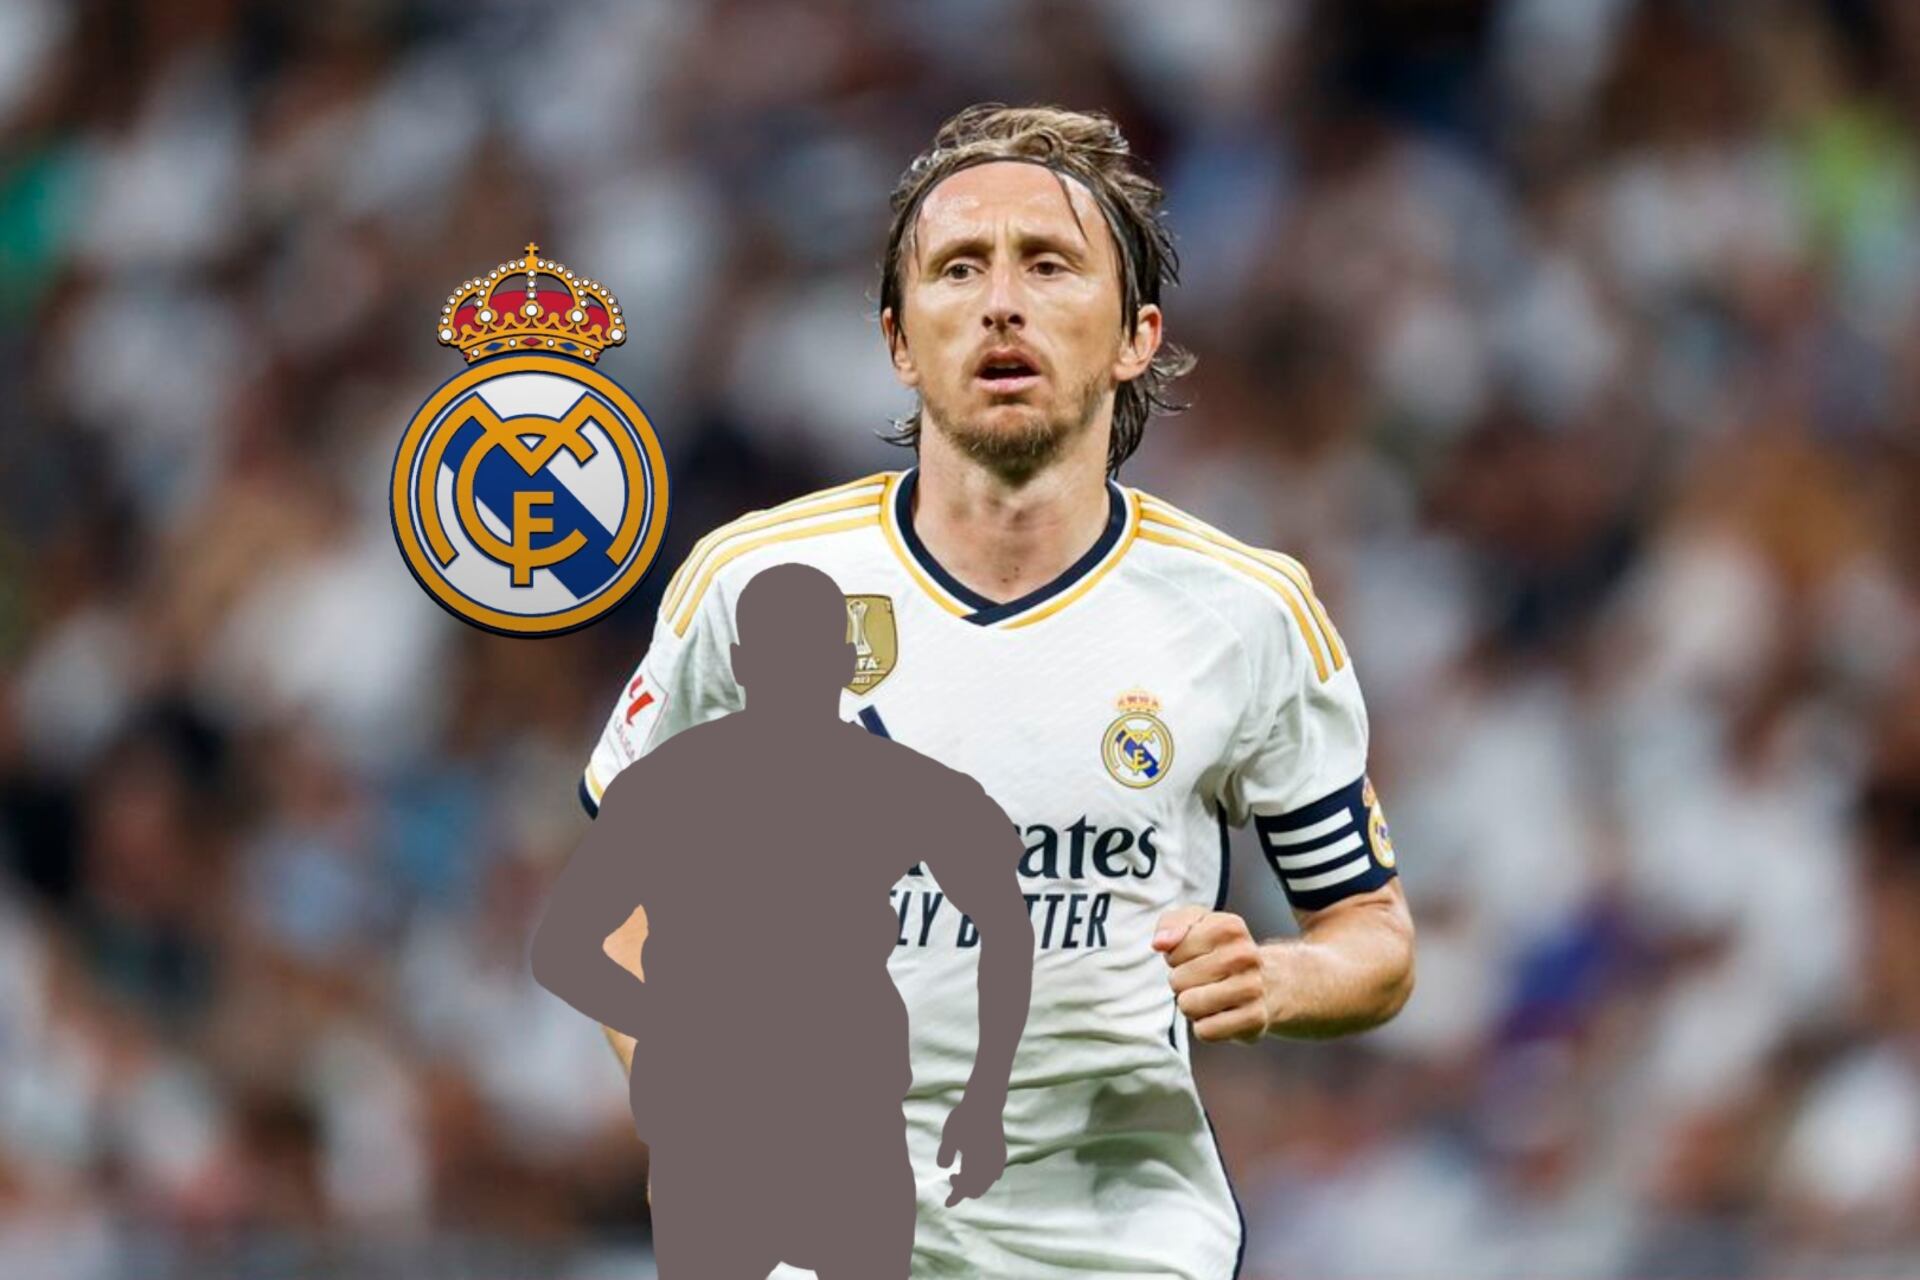 While Modric might stay, the first Real Madrid player who would leave the team with Mbappé's arrival